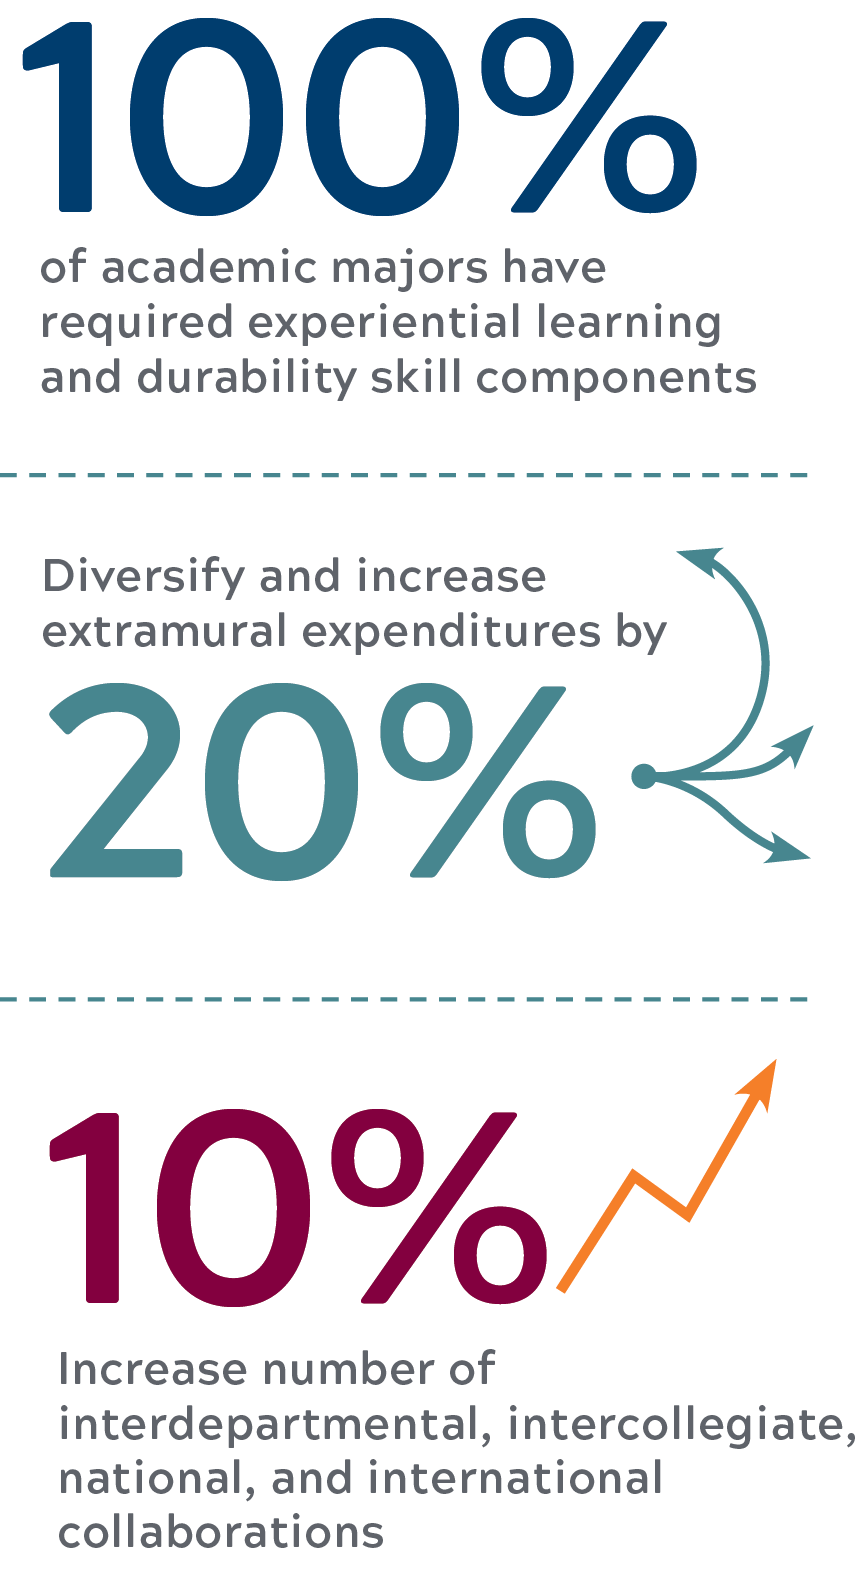 100% of academic majors have required experiential learning and durability skill components. Diversify and increase extramural expenditures by 20%. 10% increase number of interdepartmental, intercollegiate, national, and international collaborations.